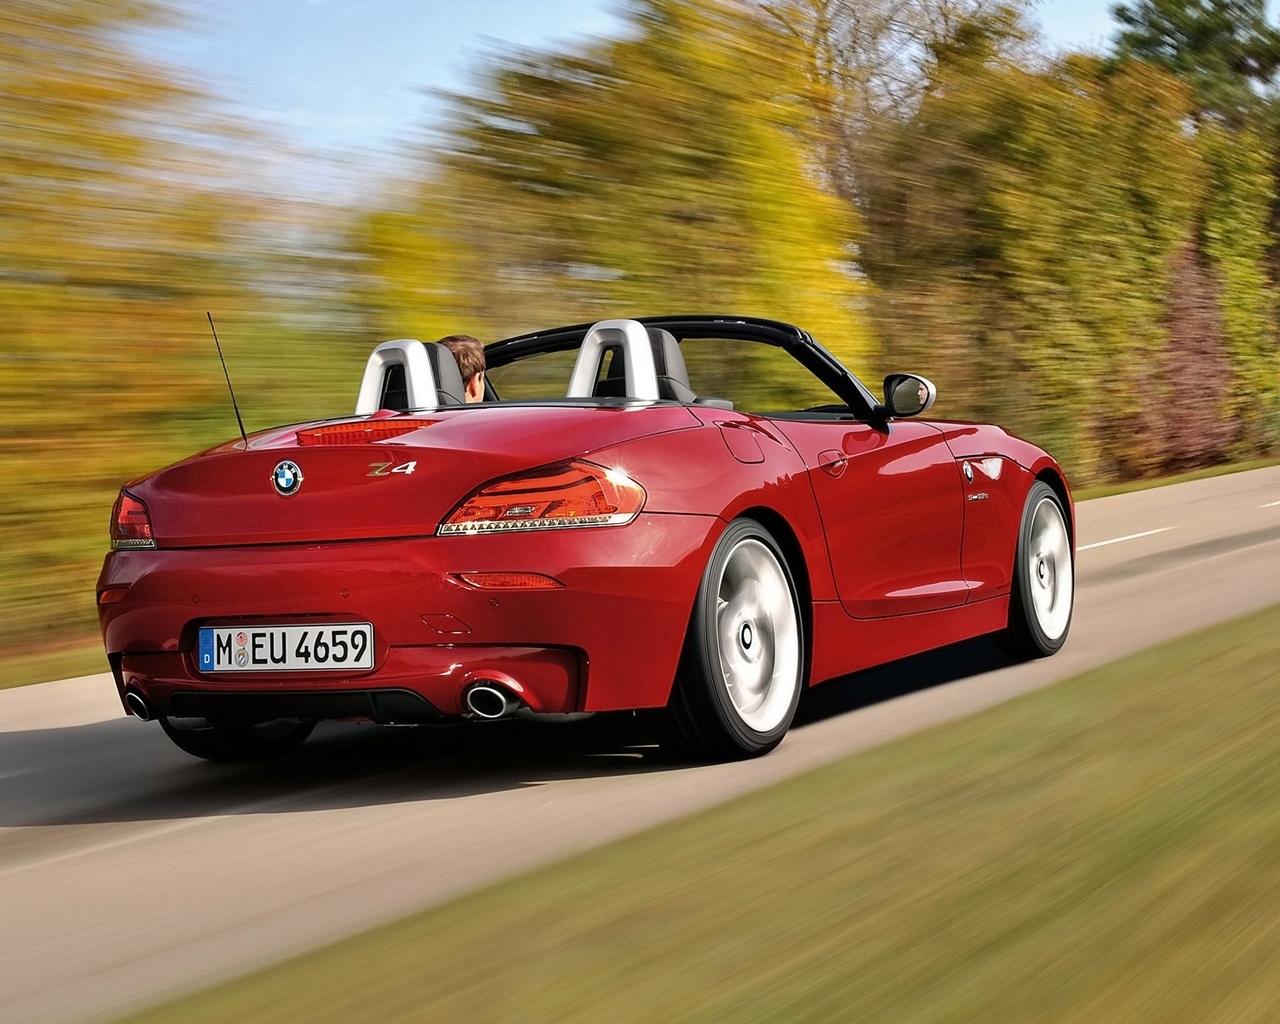 BMW Z4 sDrive35is Rear 2010 for 1280 x 1024 resolution